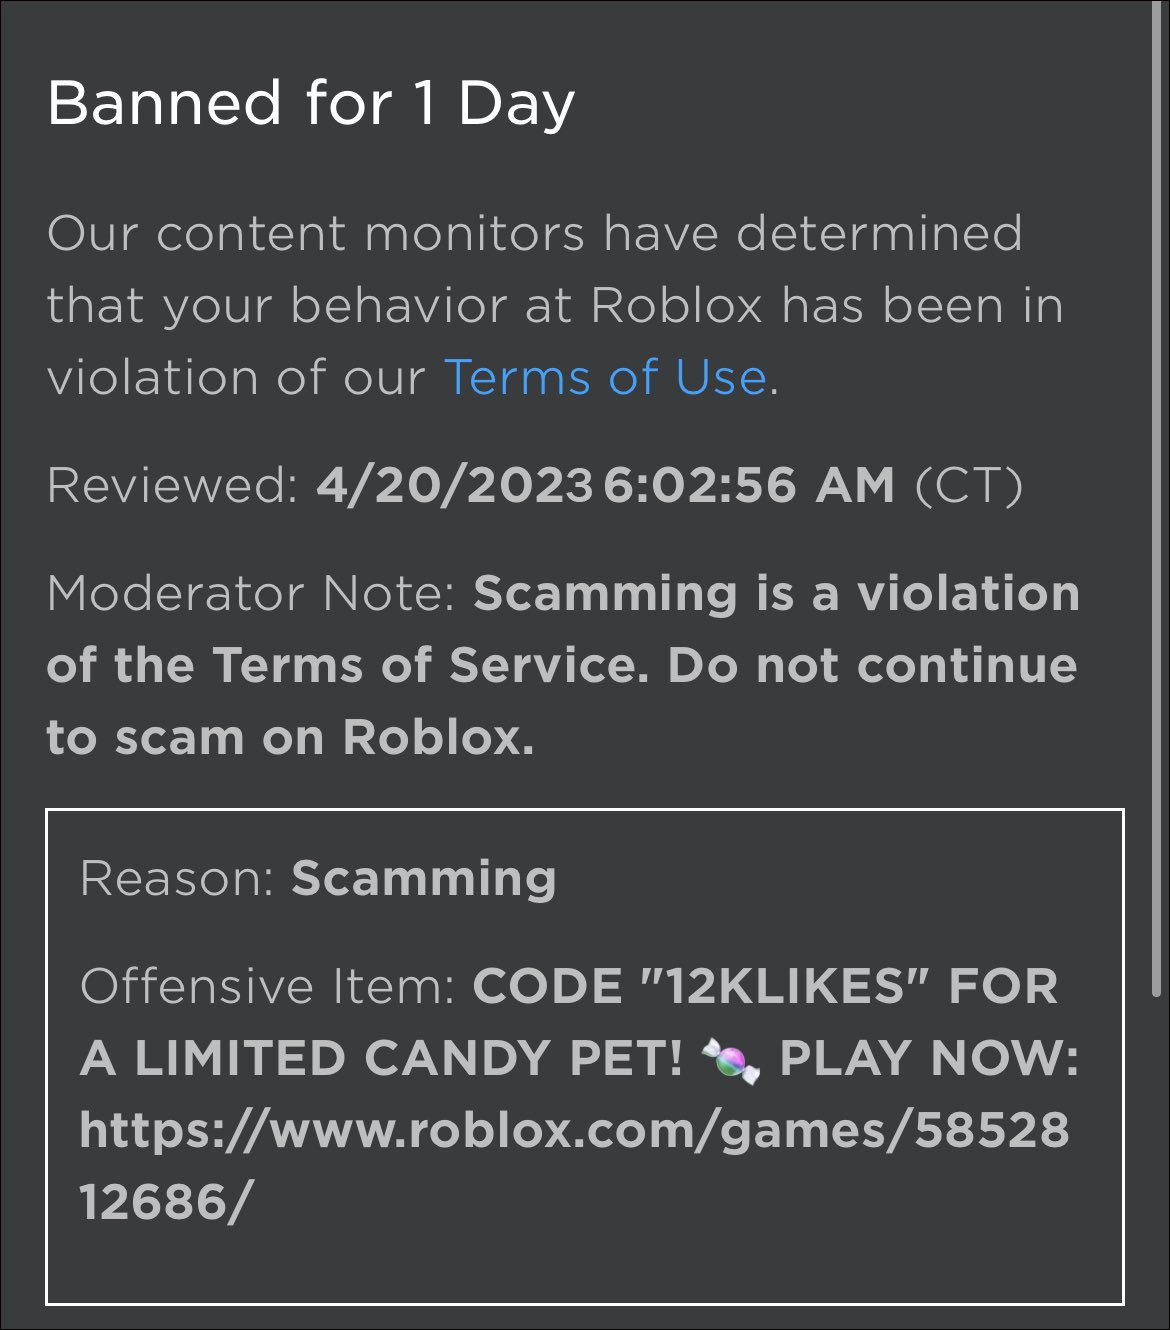 Created my Poison Ban Message